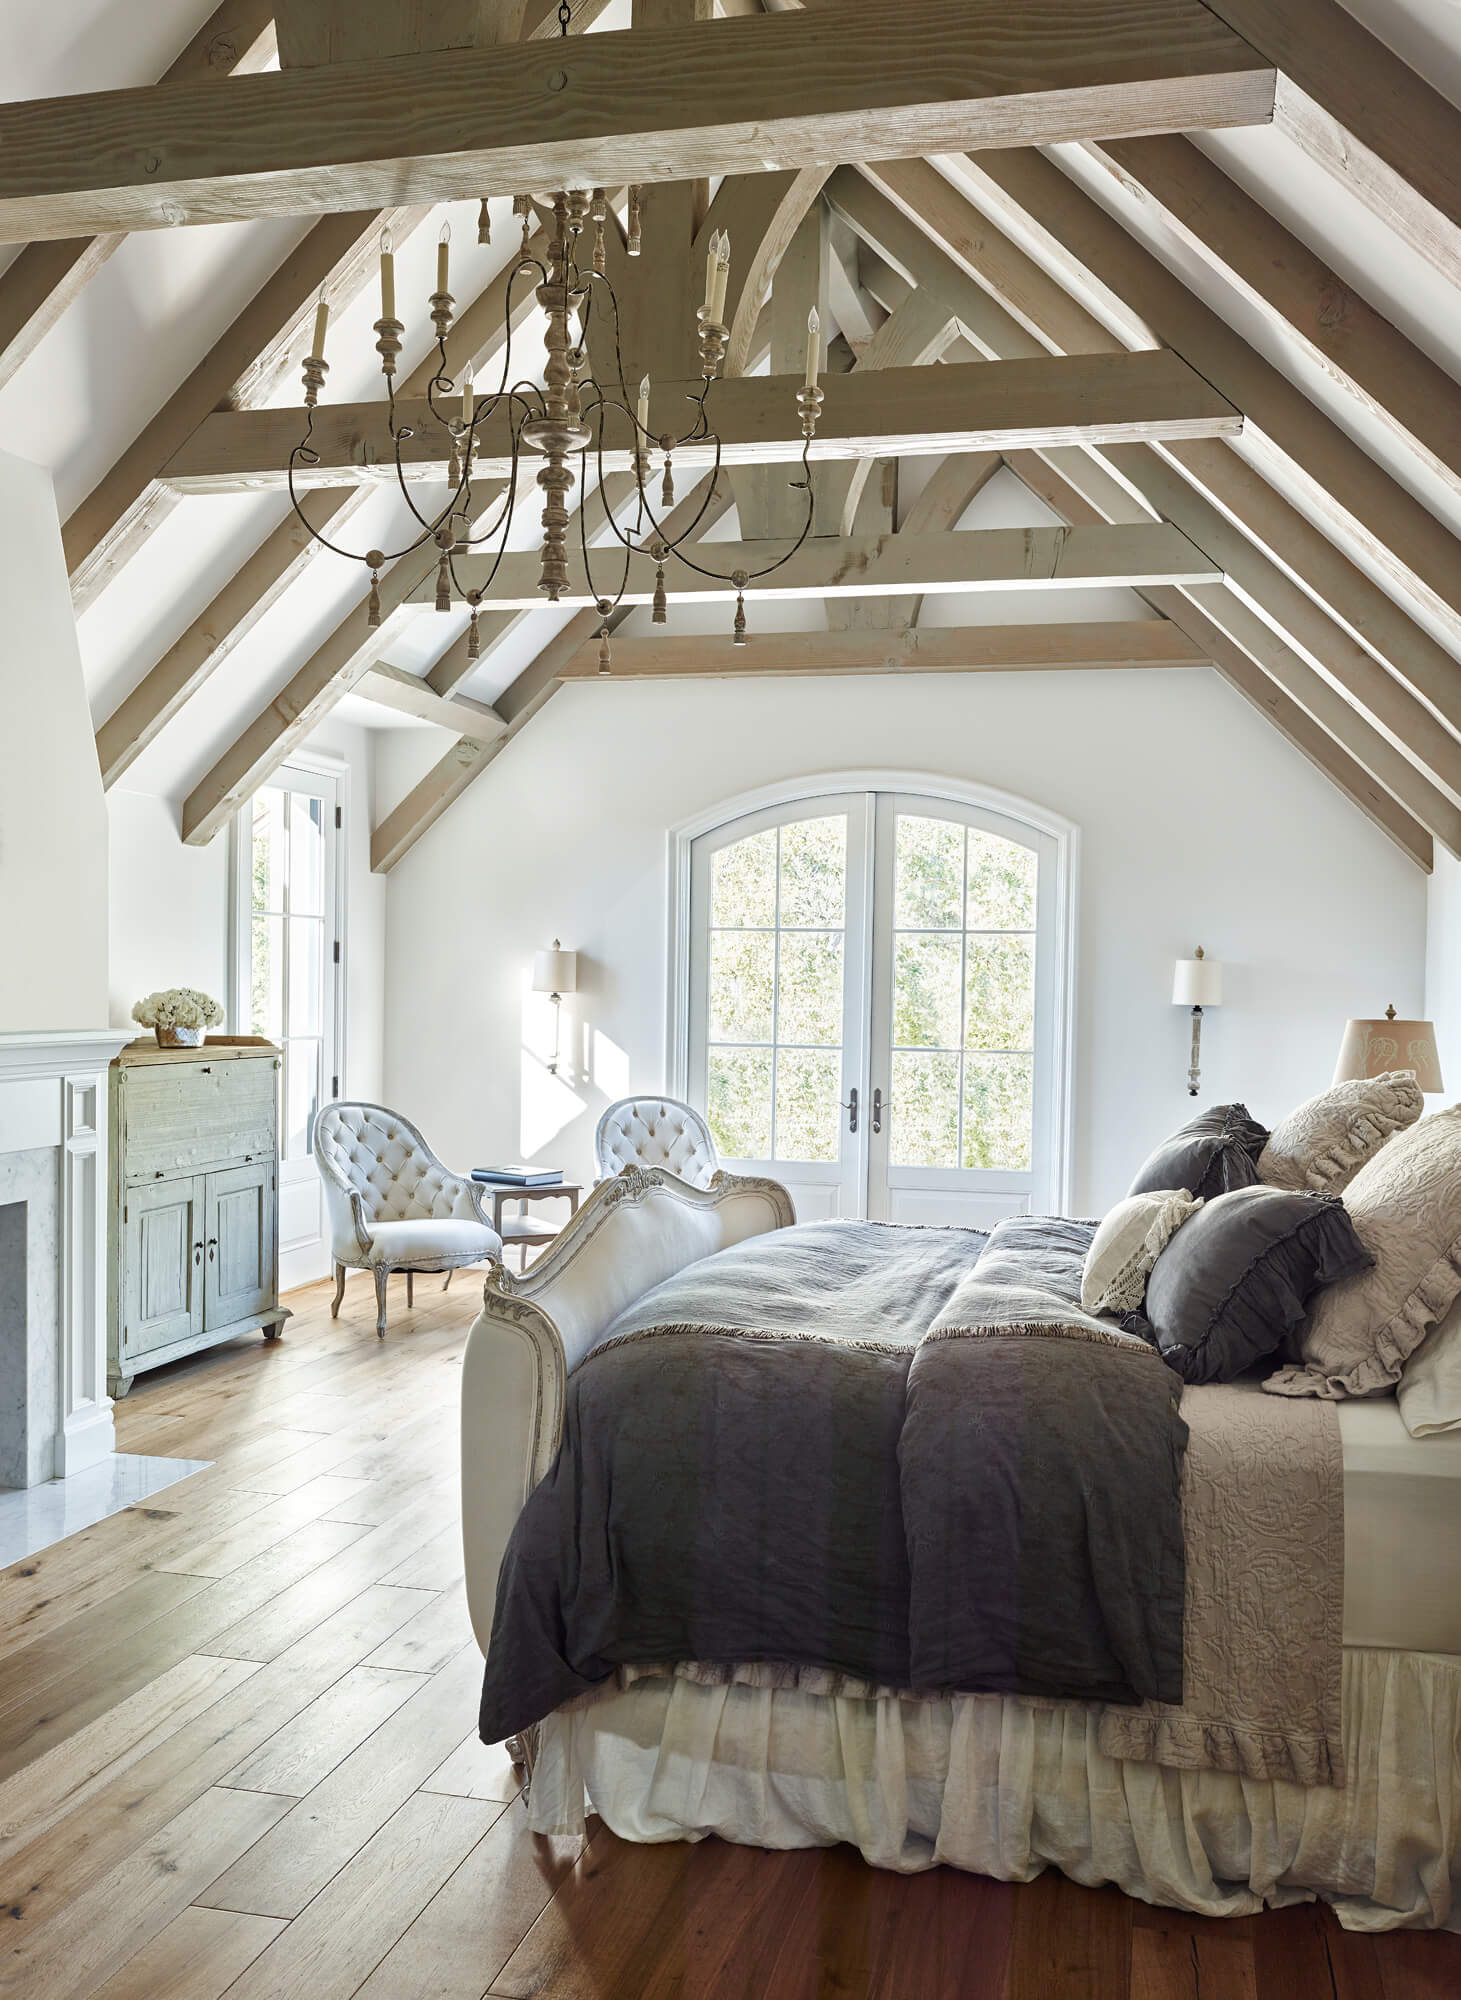 Chandelier and exposed beams